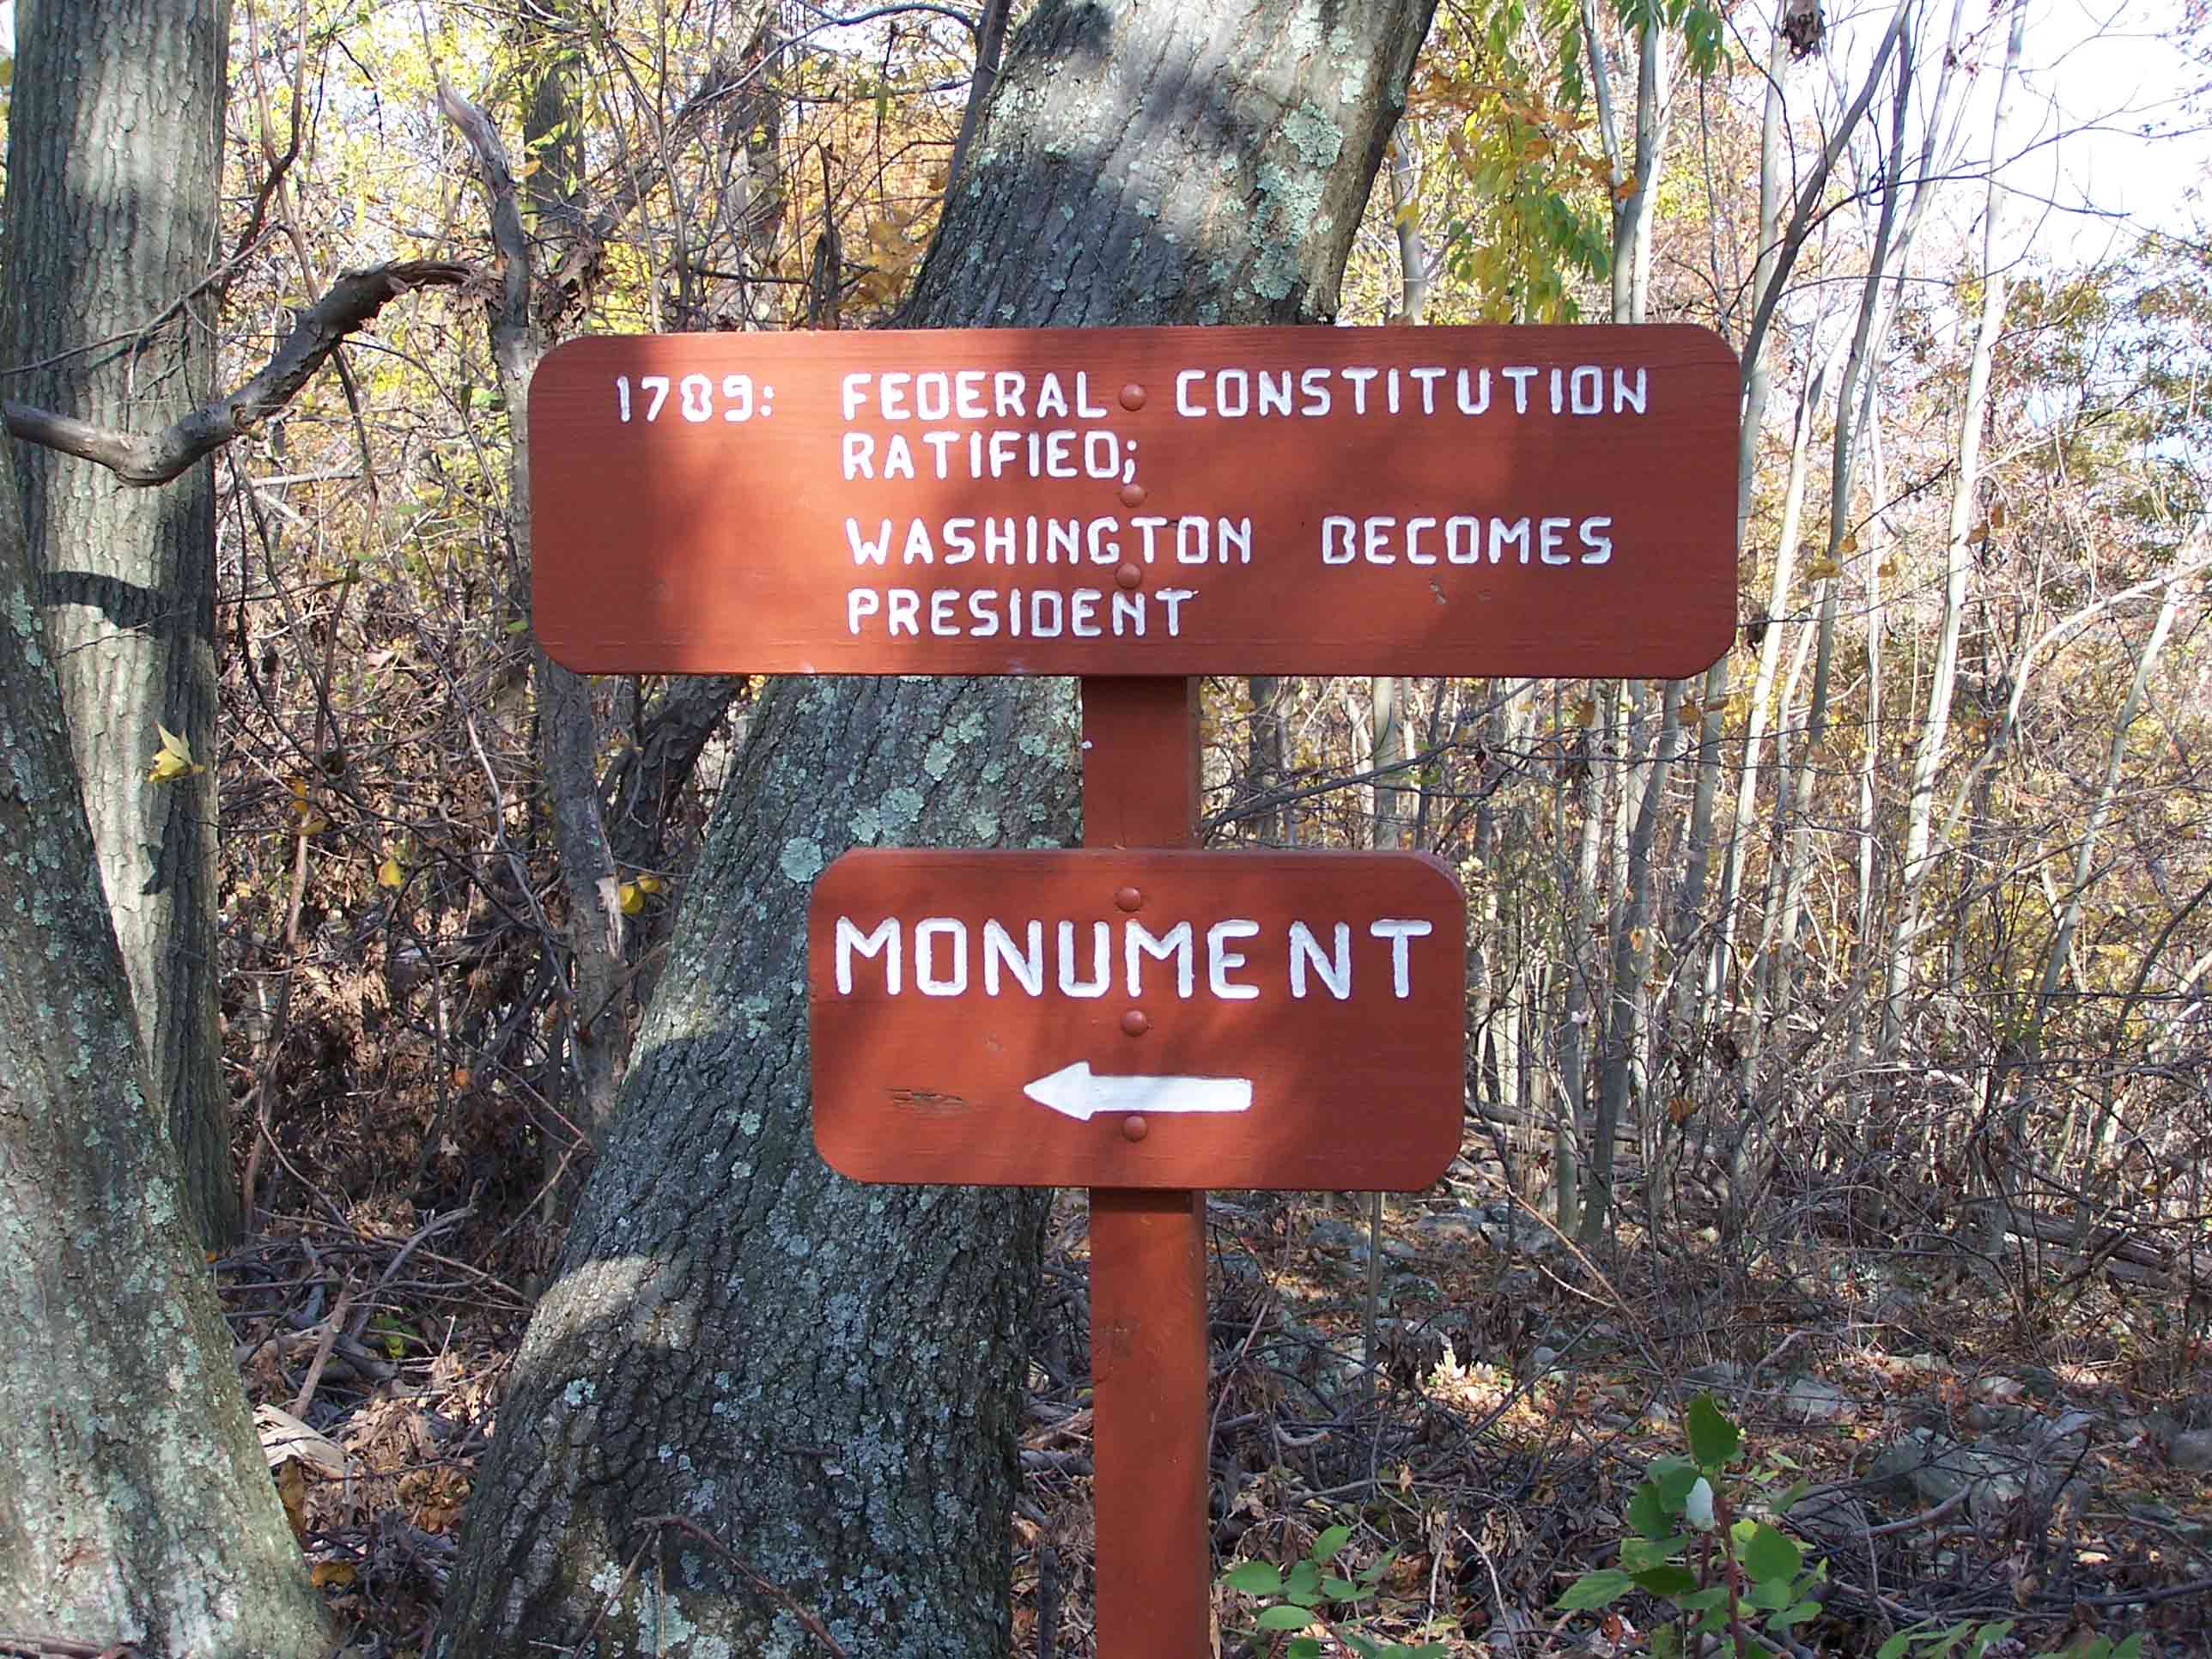 Information sign after Washington Monument. Courtesy at@rohland.org